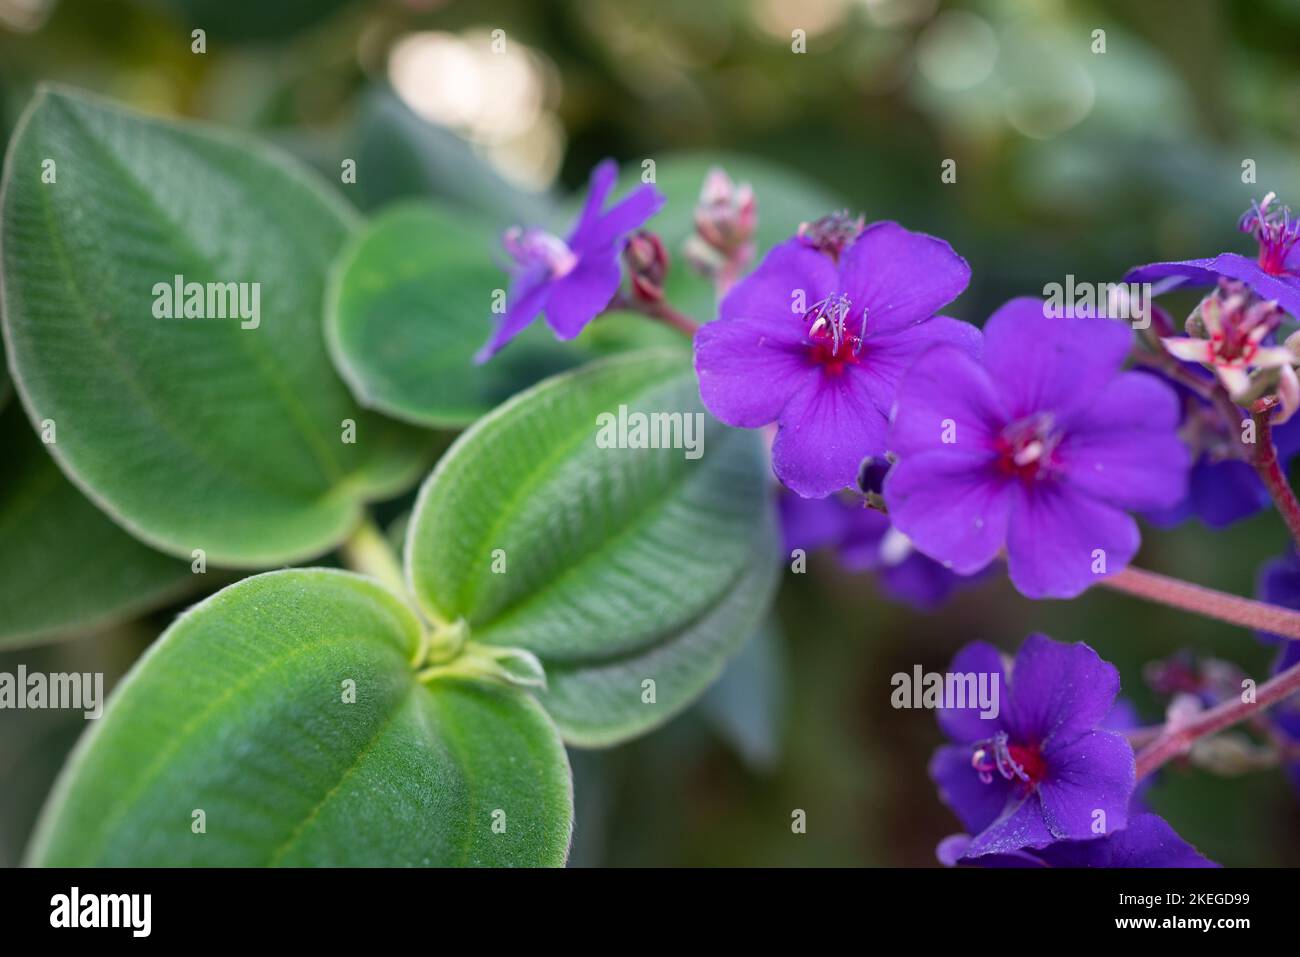 Silvery green leaves and purple flowers closeup of silverleafed princess flower Stock Photo